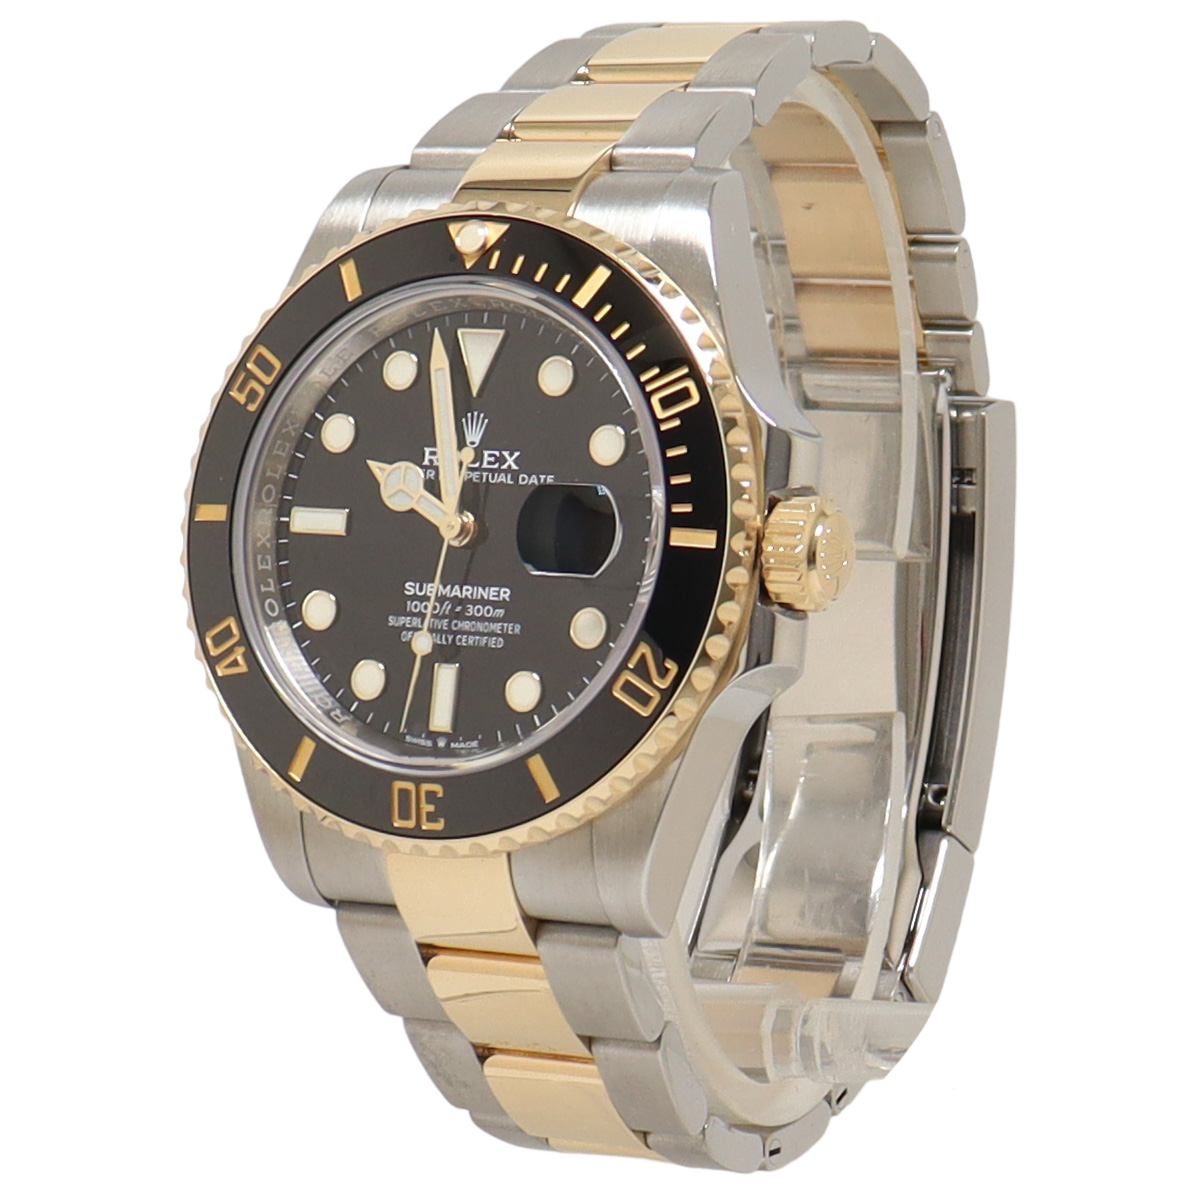 Rolex Submariner Two Tone Yellow Gold & Steel 41mm Black Dot Dial Watch Reference#: 126613LN - Happy Jewelers Fine Jewelry Lifetime Warranty